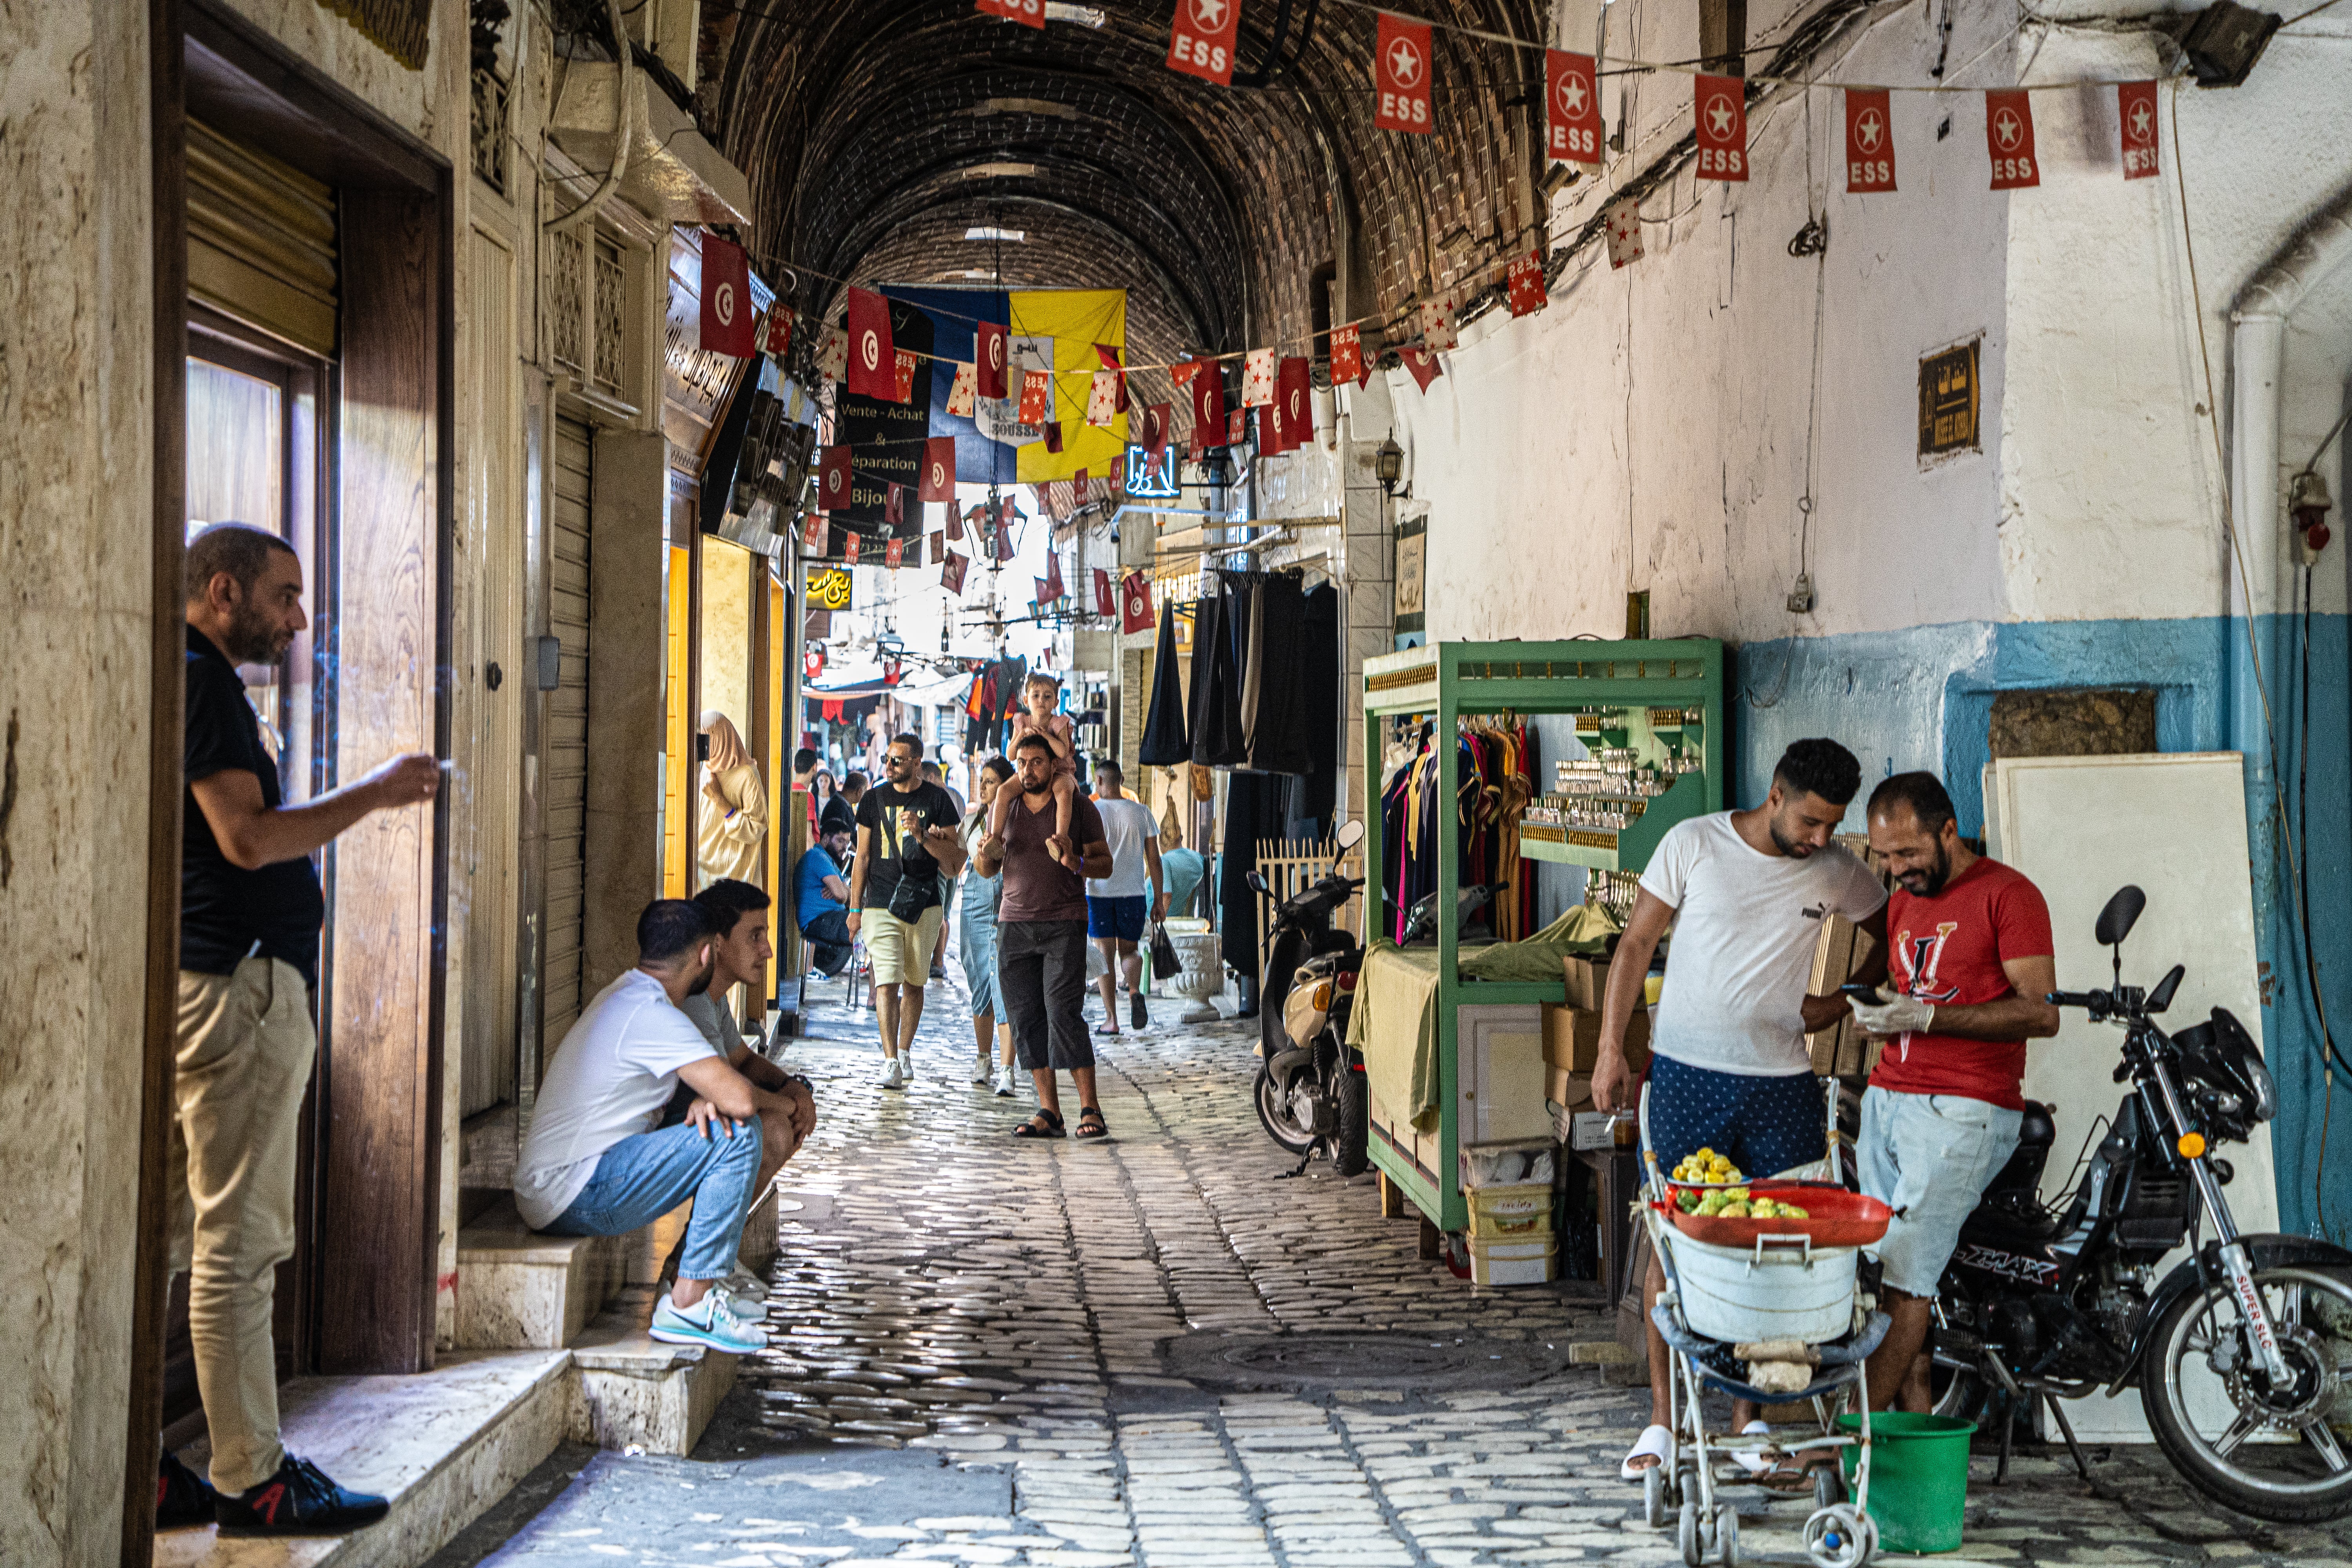 The Sousse medina has managed to maintain its traditional character